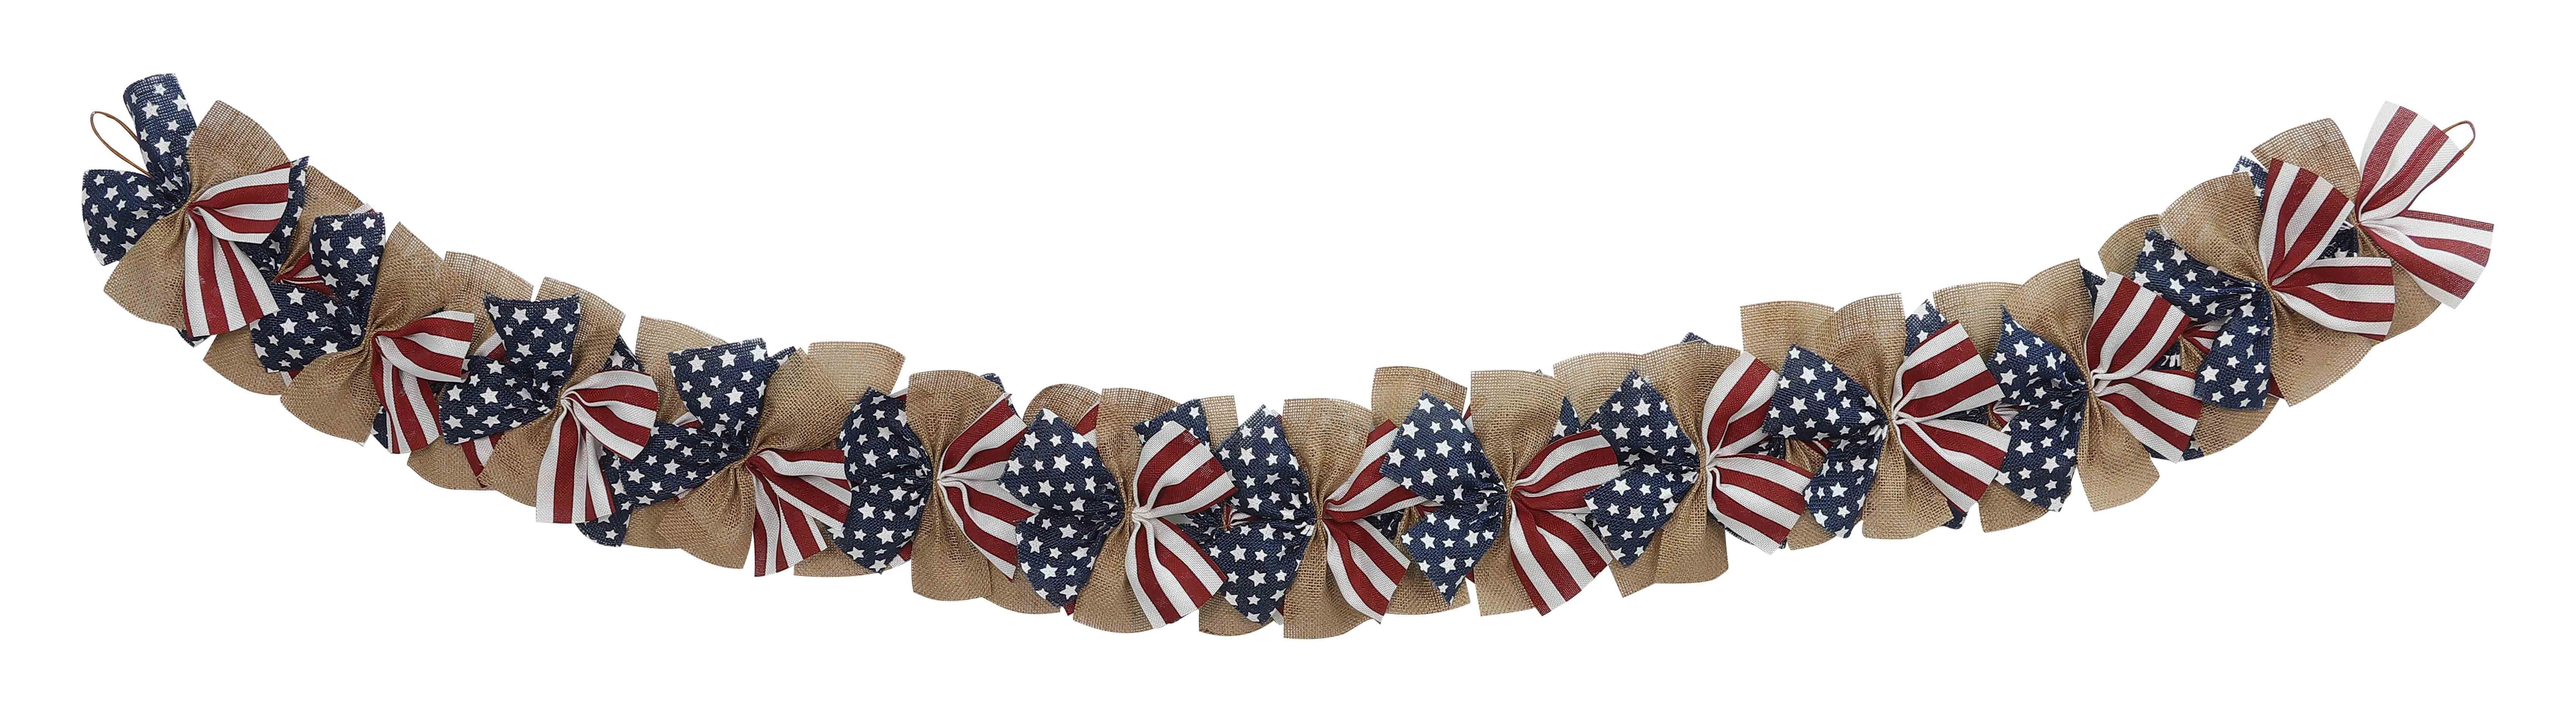 4th of July Patriotic 6ft Burlap Garland, Red/White/Blue -Way to Celebrate | Walmart (US)